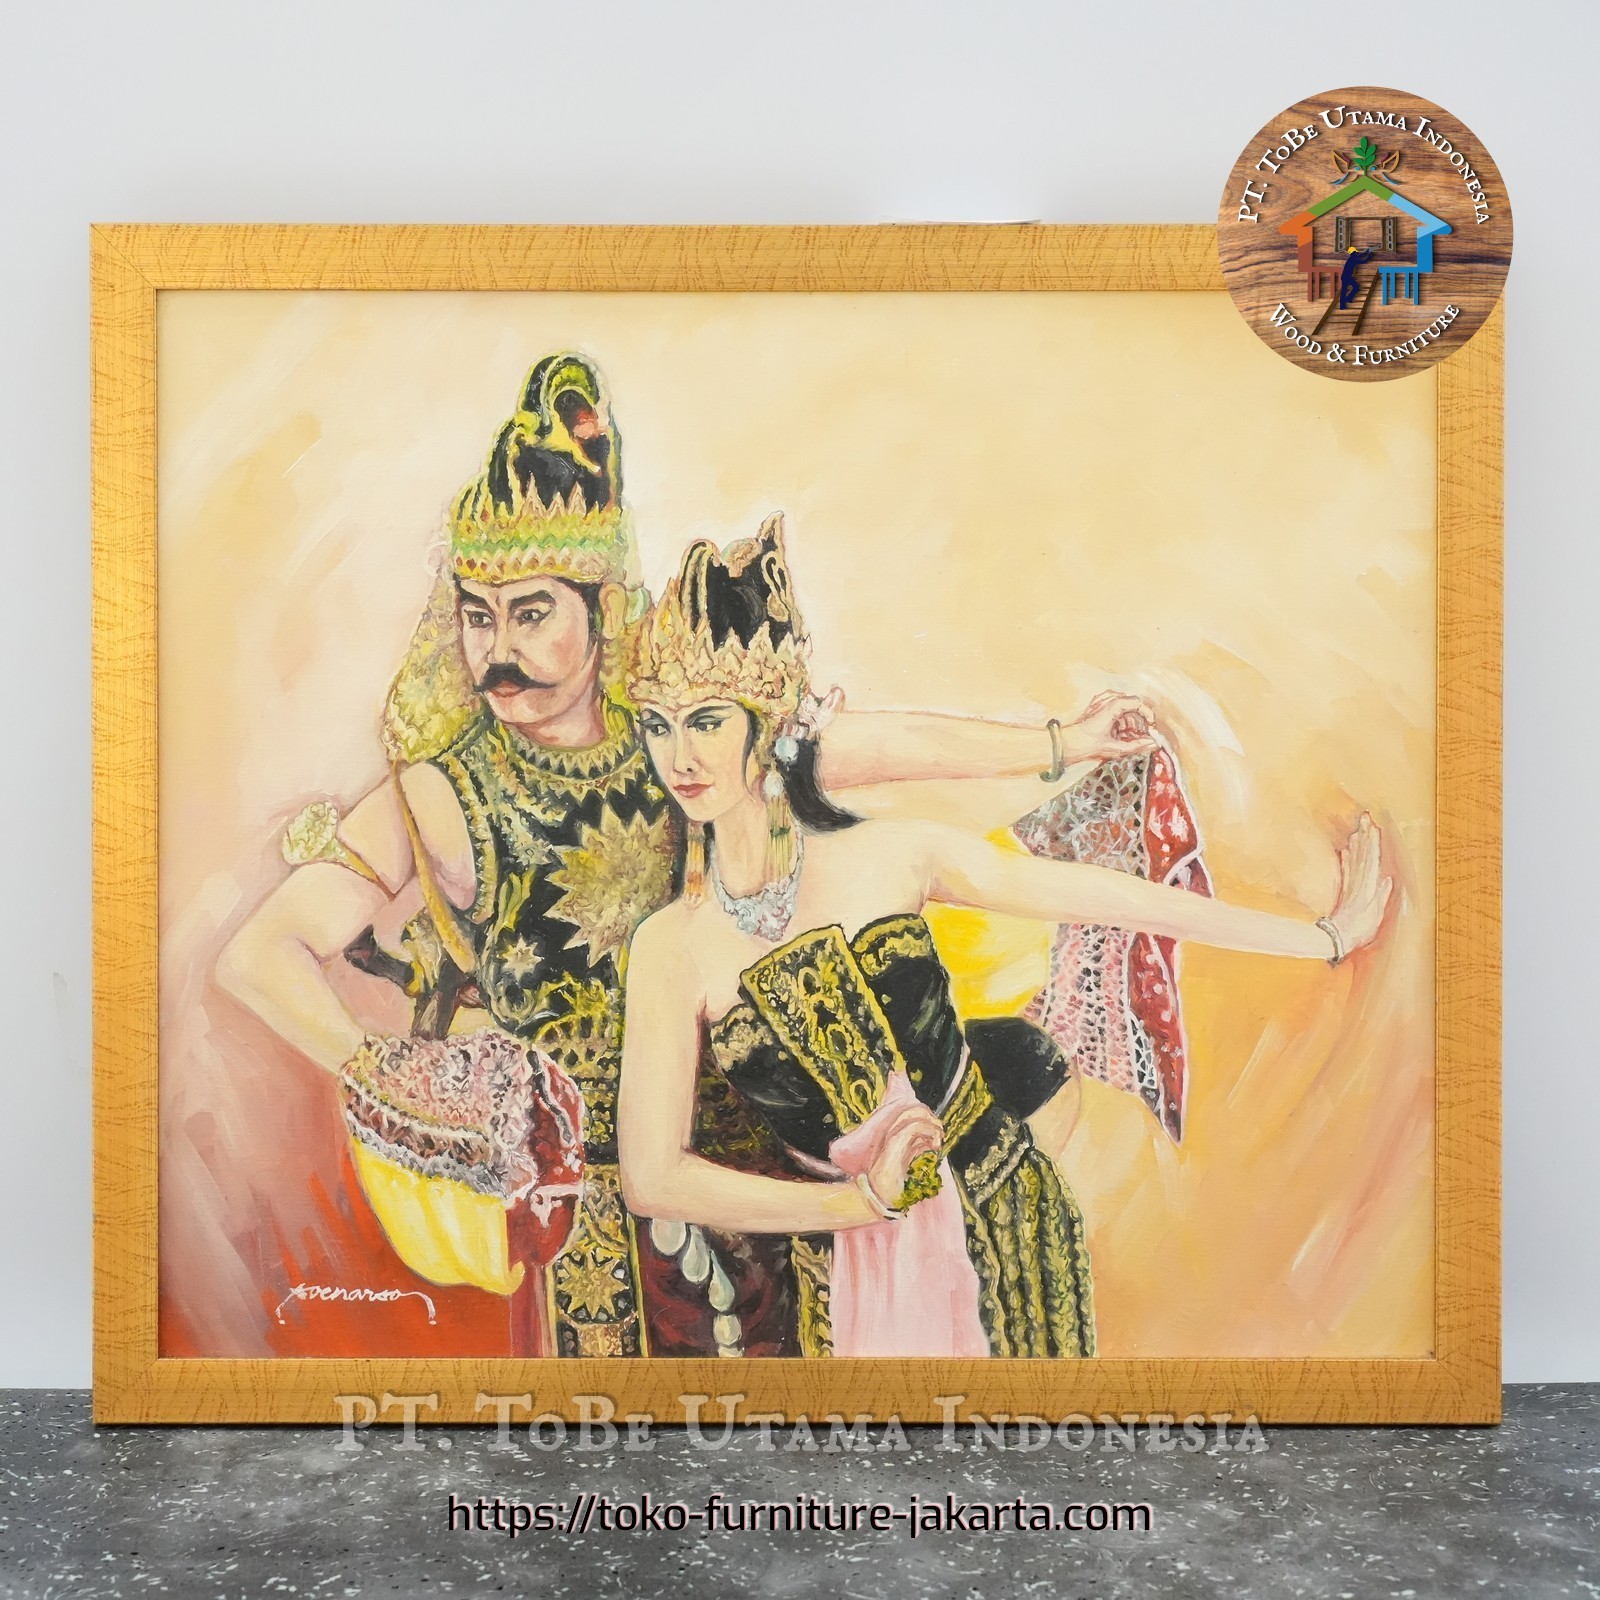 Accessories: Painting of Rama & Sinta (image 1 of 3).